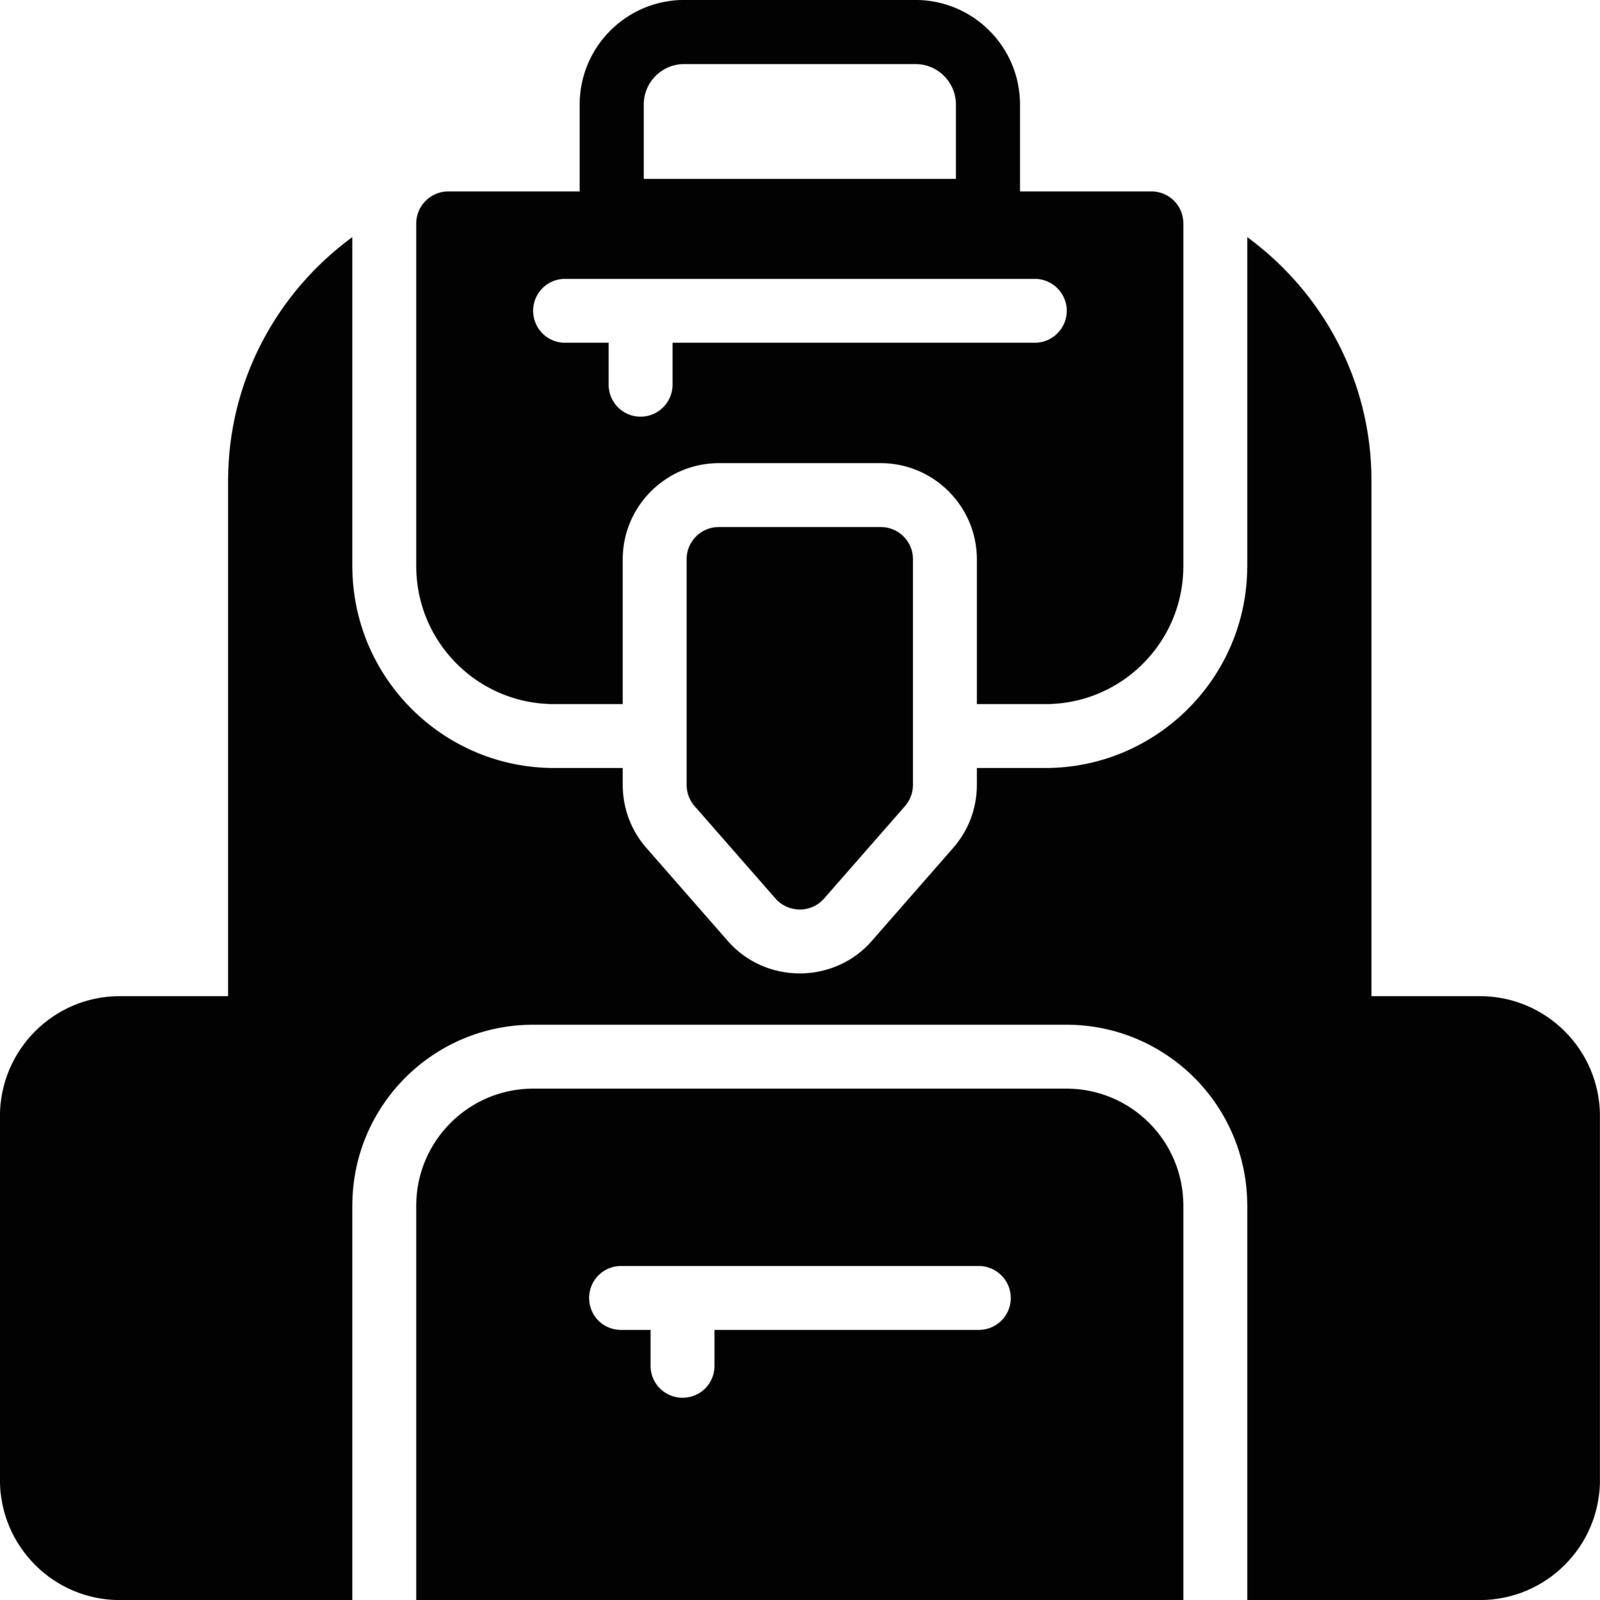 backpack vector glyph flat icon